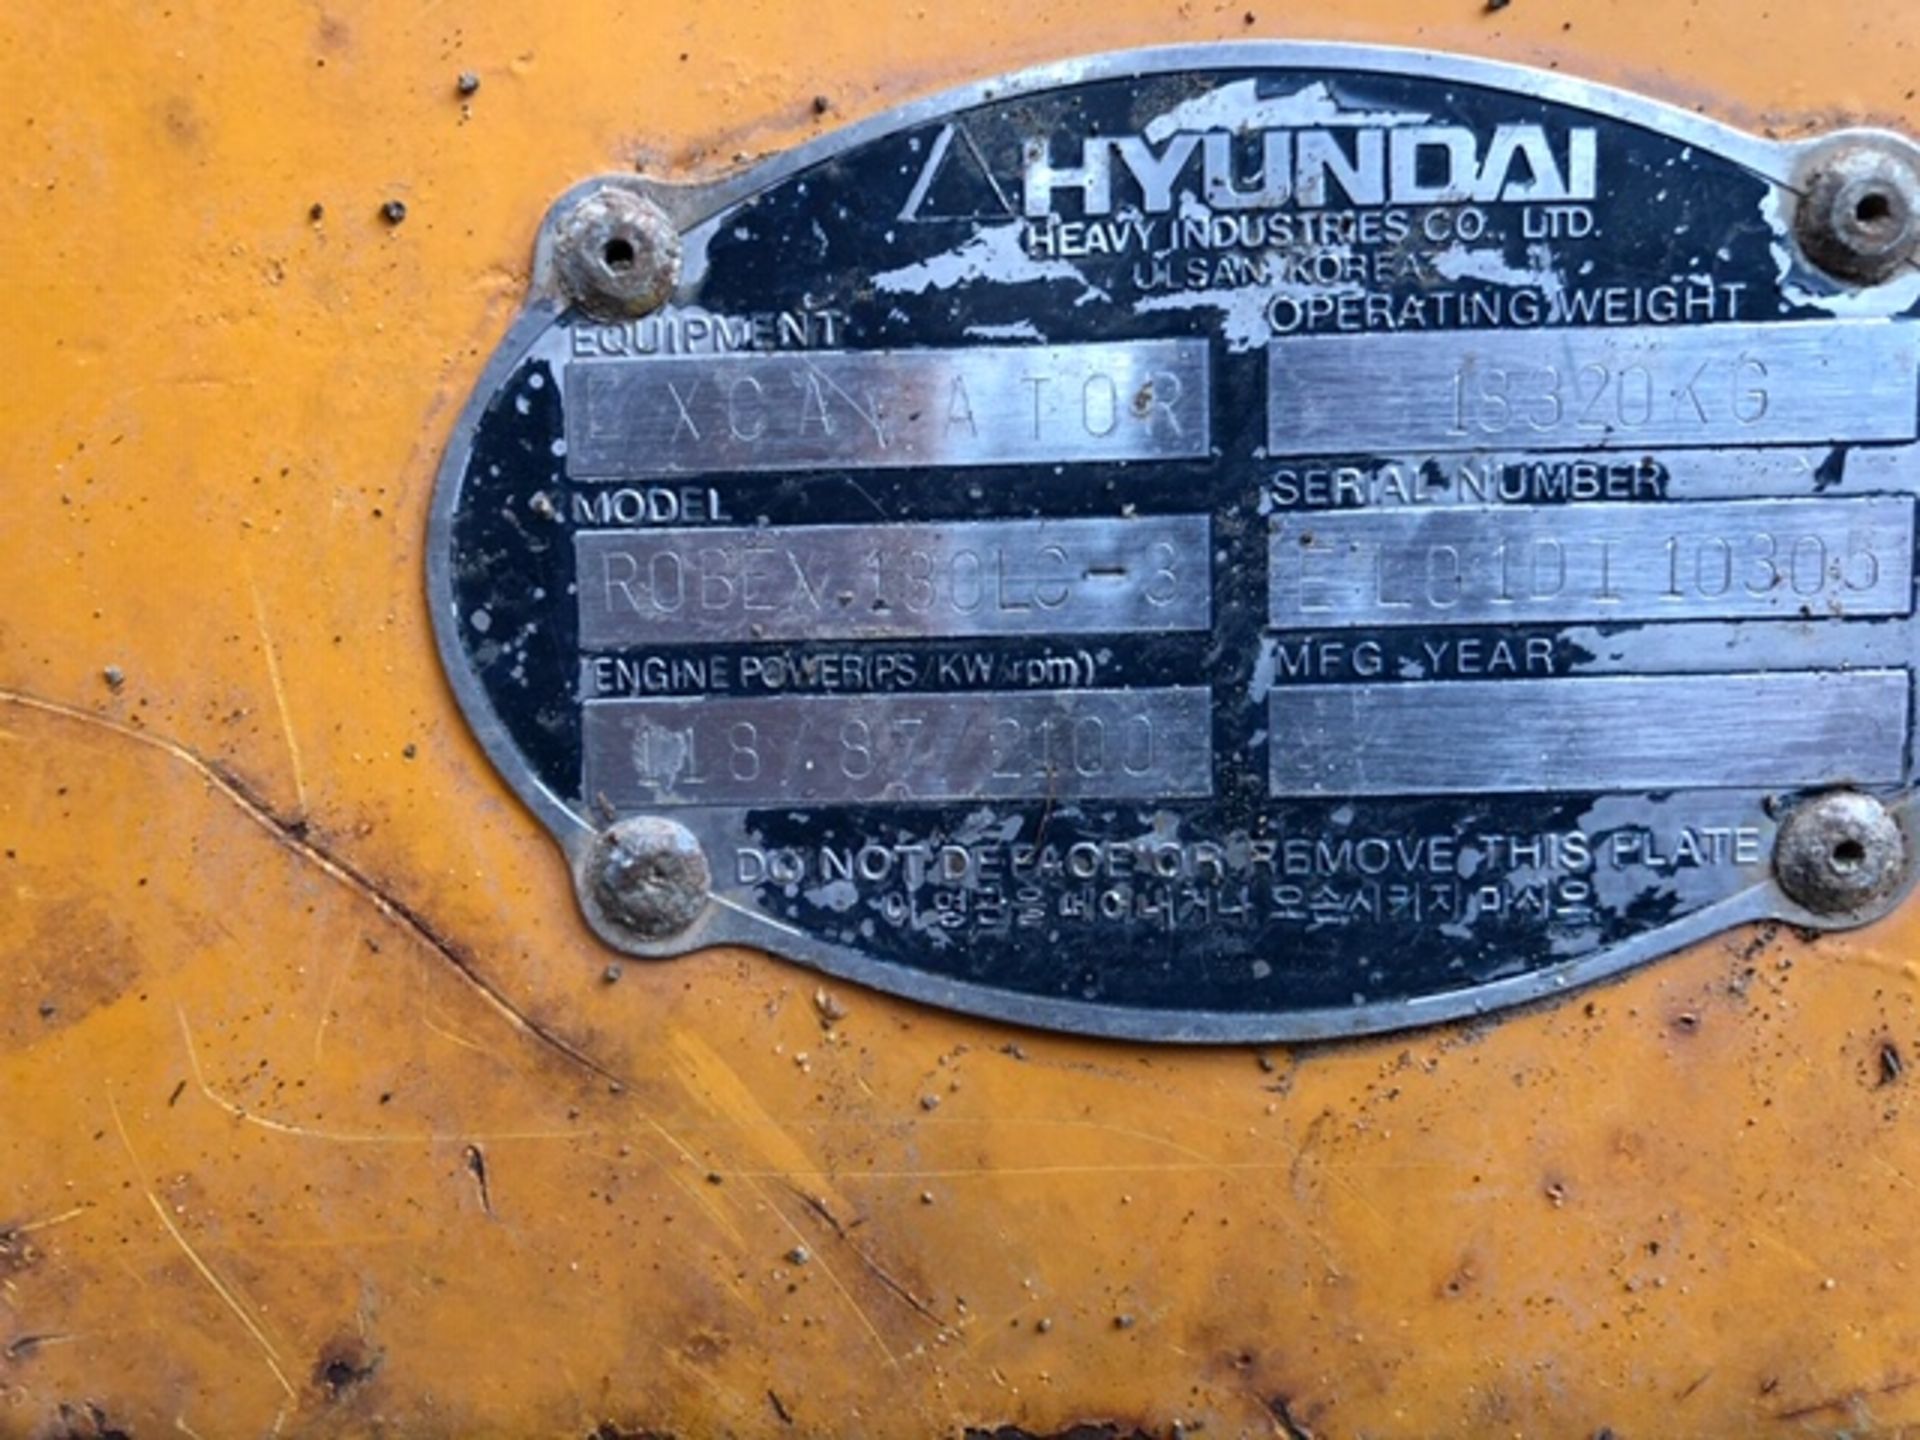 HYUNDAI 180 LC-3 ROBEX 18 TONNE EXCAVATOR. YEAR 1998 APPROX. WHEN TESTED WAS SEEN TO DRIVE, SLEW, AN - Image 6 of 9